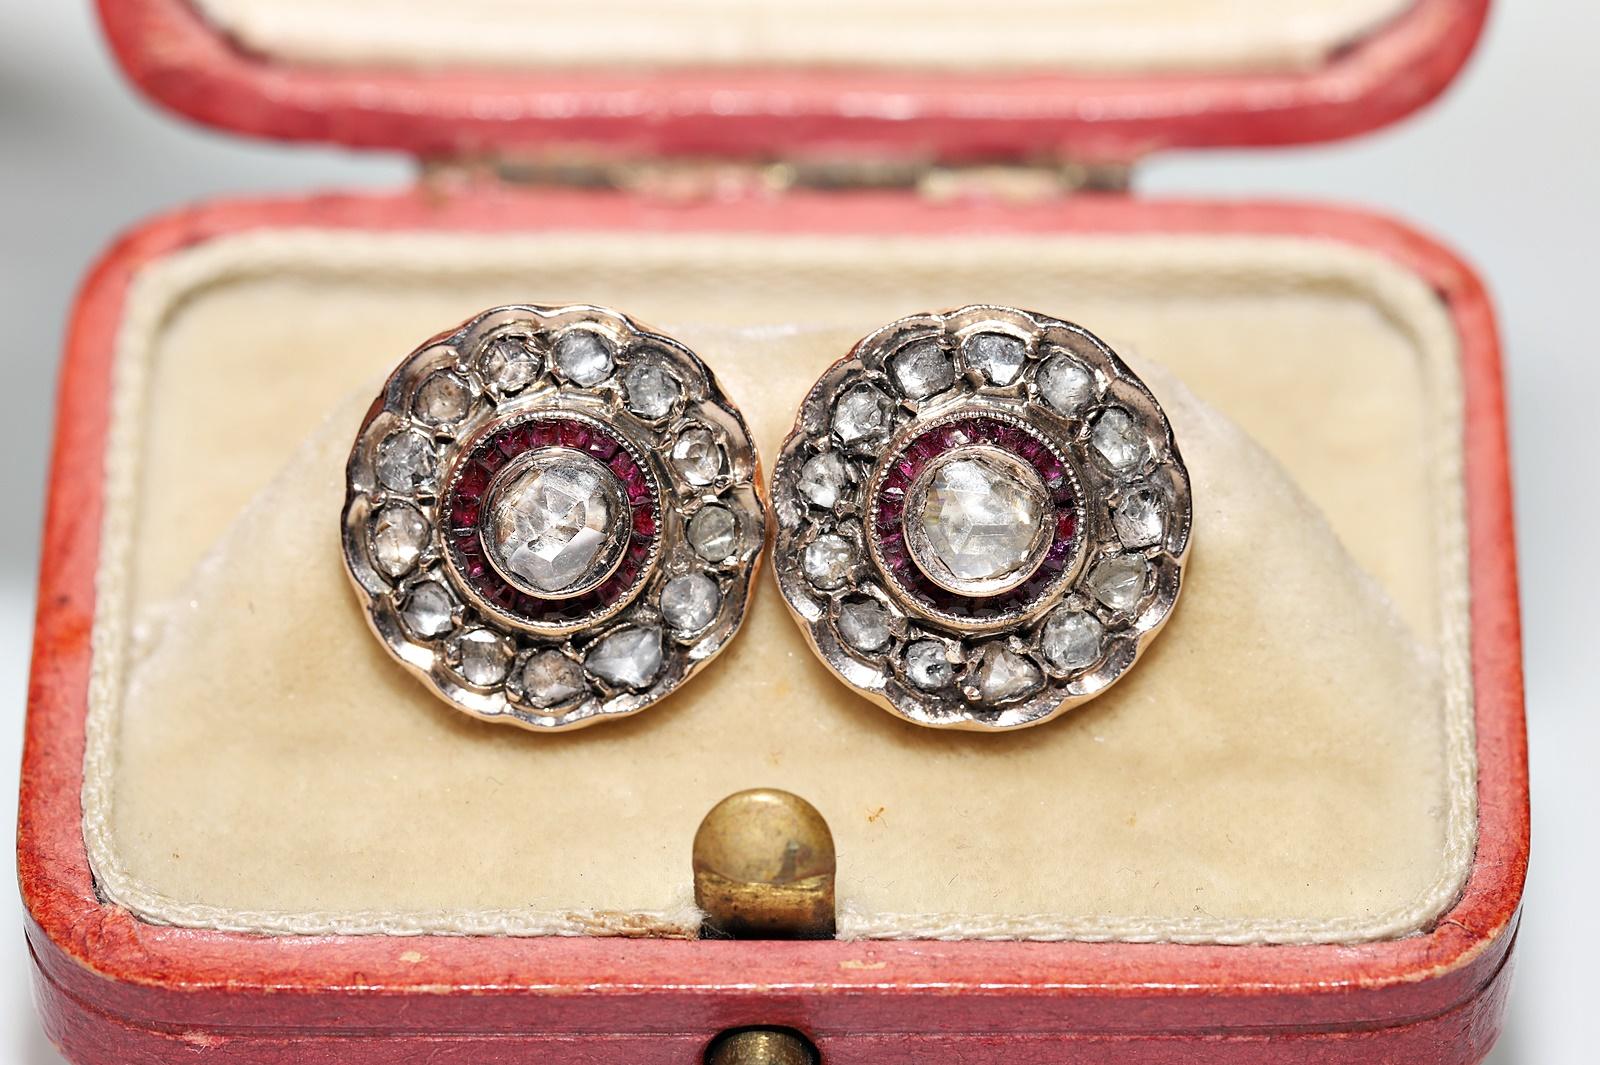 In very good condition.
Total weight is 4.6 grams.
Totally is diamond 0.90 ct.
Totally is ruby 0.30 ct.
The body part 12k gold.
The earring is 12k gold but connection piece 14k gold.
Box is not included.
Please contact for any questions.